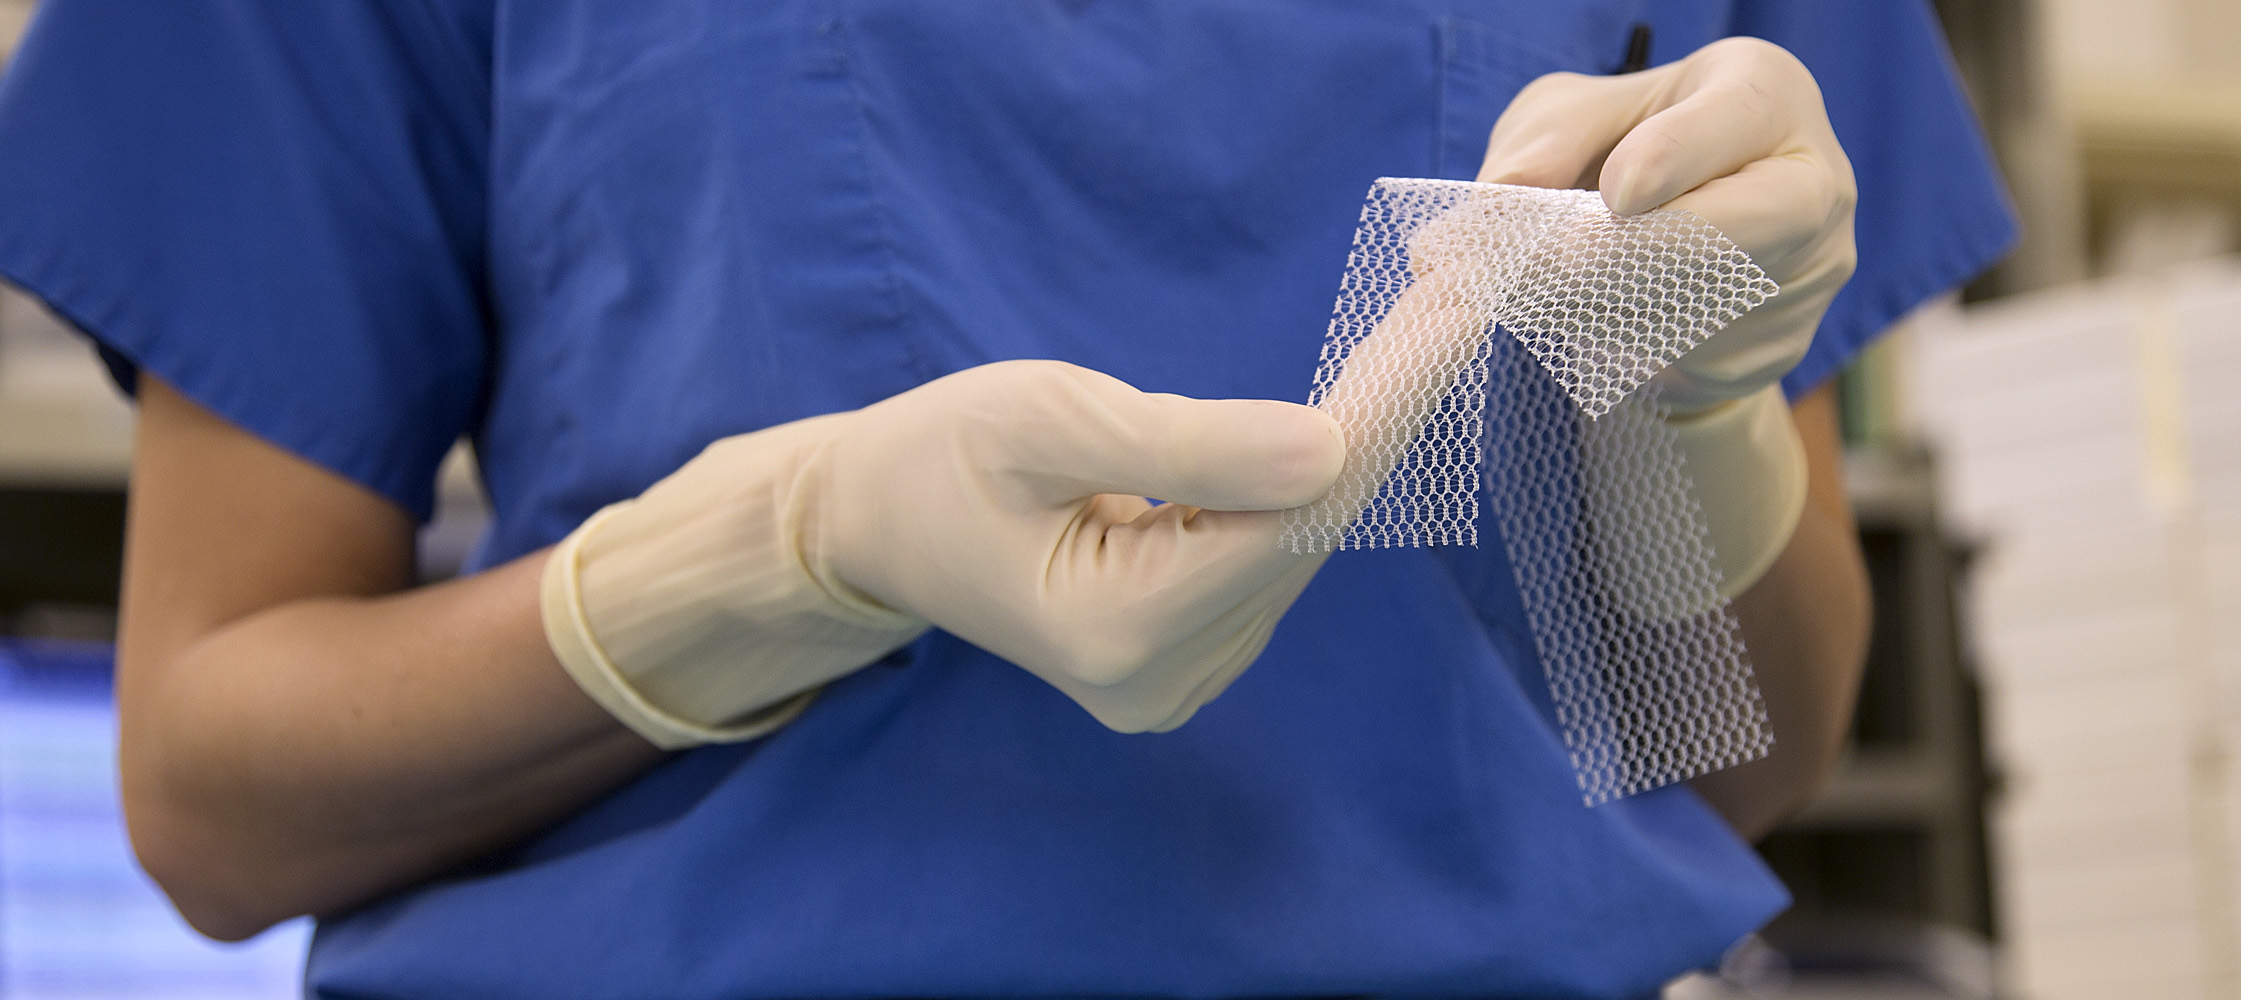 The most common vaginal mesh is made from polypropylene, a flexible, woven plastic.